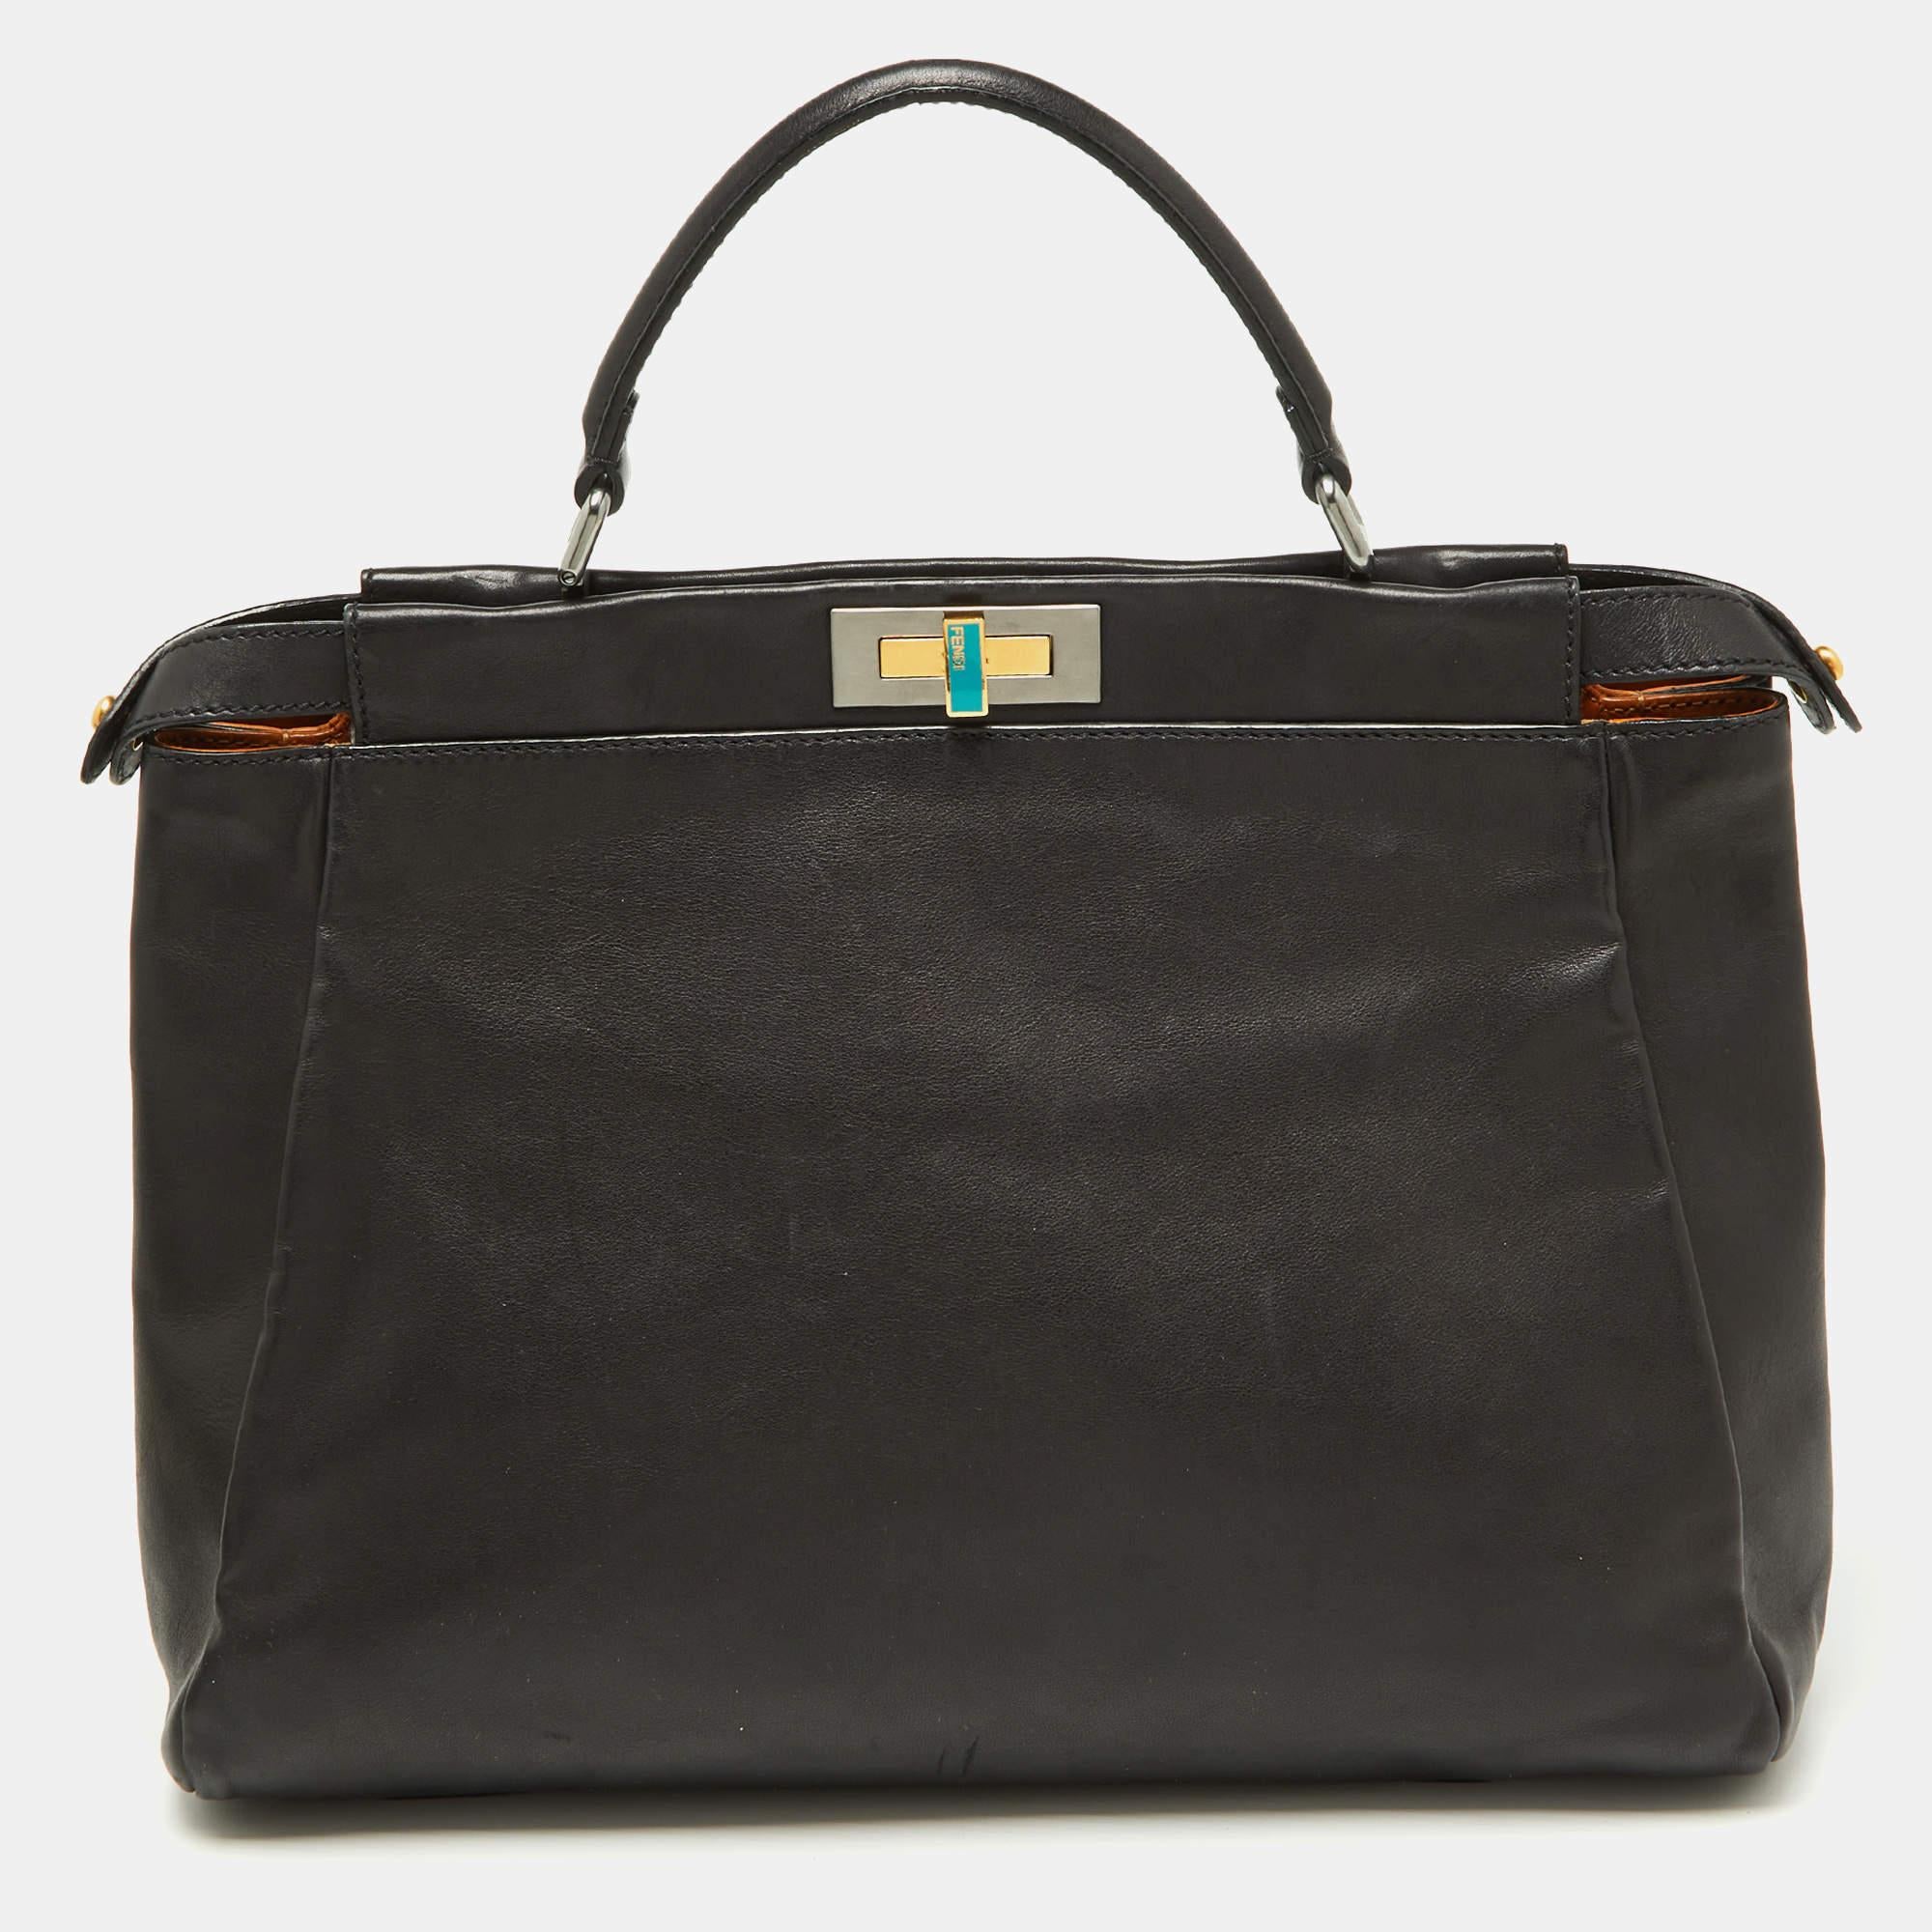 Designed by Venturini Fendi, the Peekaboo first debuted in 2008. The unique construction and representation of this bag enable it to keep up with fashion's ever-changing tide. Constructed from leather, it is complemented with two-tone hardware and a